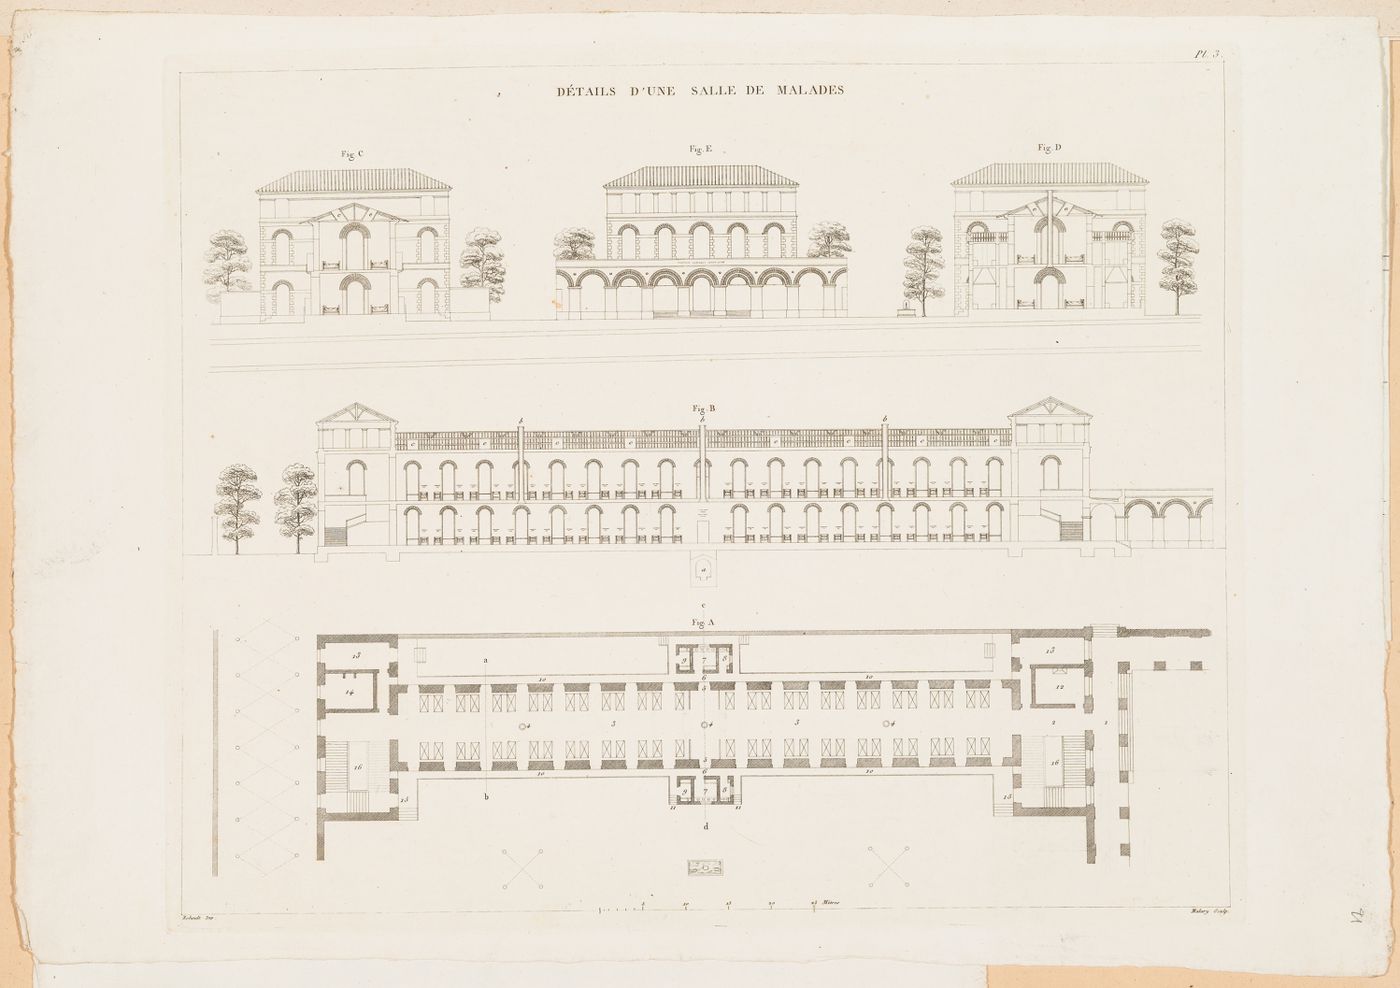 Ideal hospital for 1000 to 1200 patients, Paris: Sections, elevation and plan for a ward